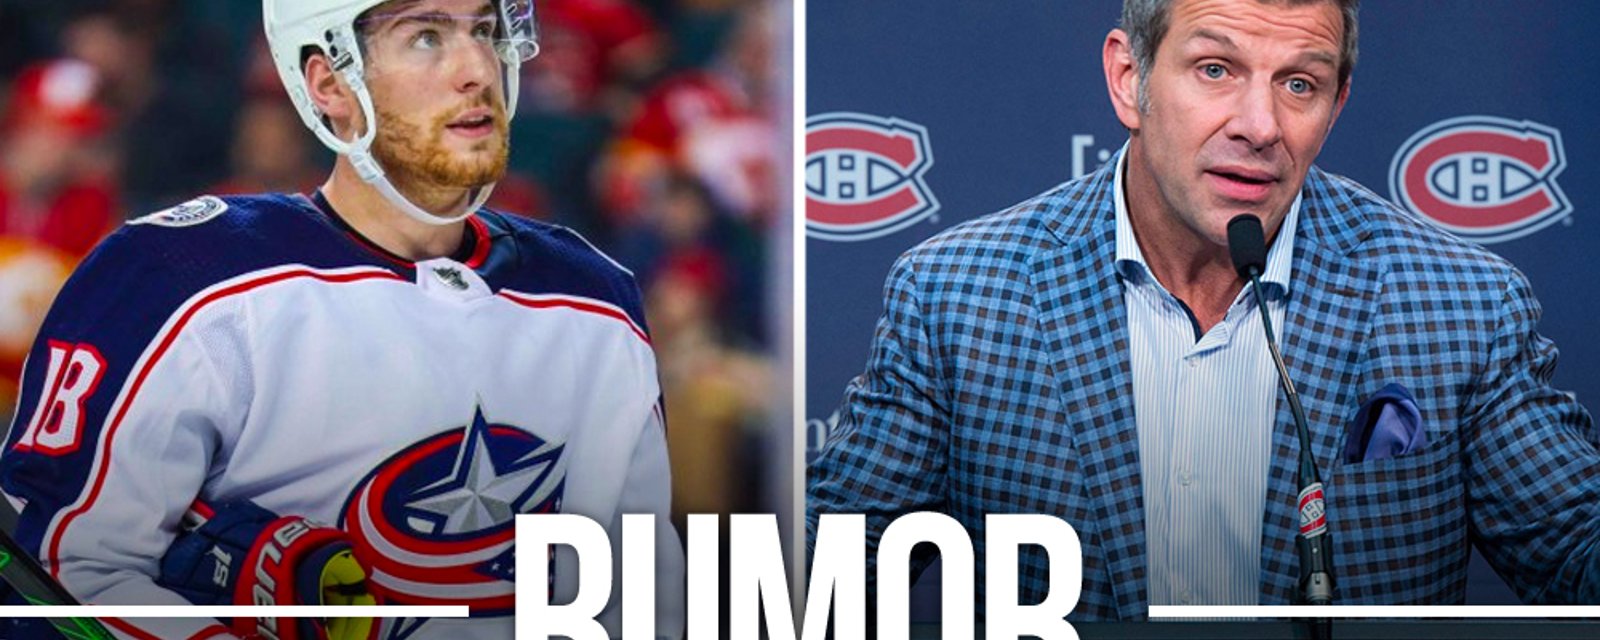 Report: Blue Jackets seeking a king's ransom from Canadiens in Dubois trade talks